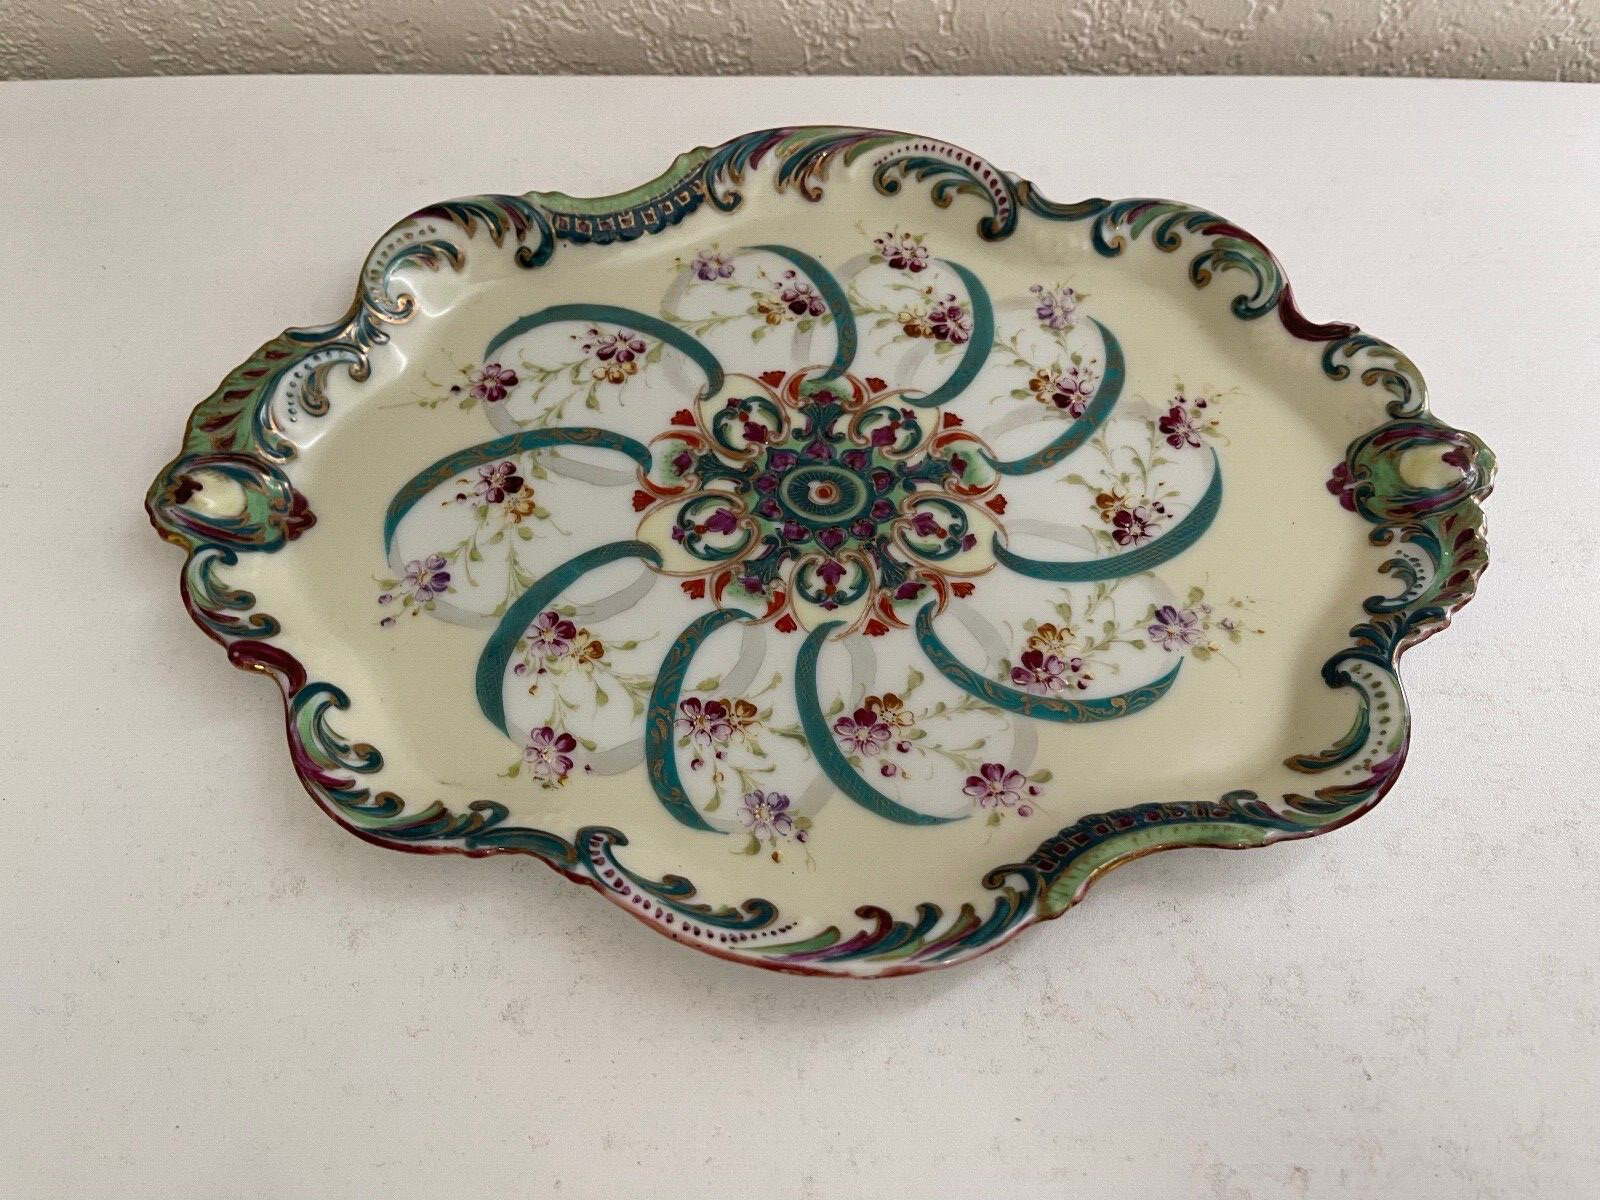 Antique Unmarked Porcelain Dresser Tray w/ Hand Painted Floral Decoration